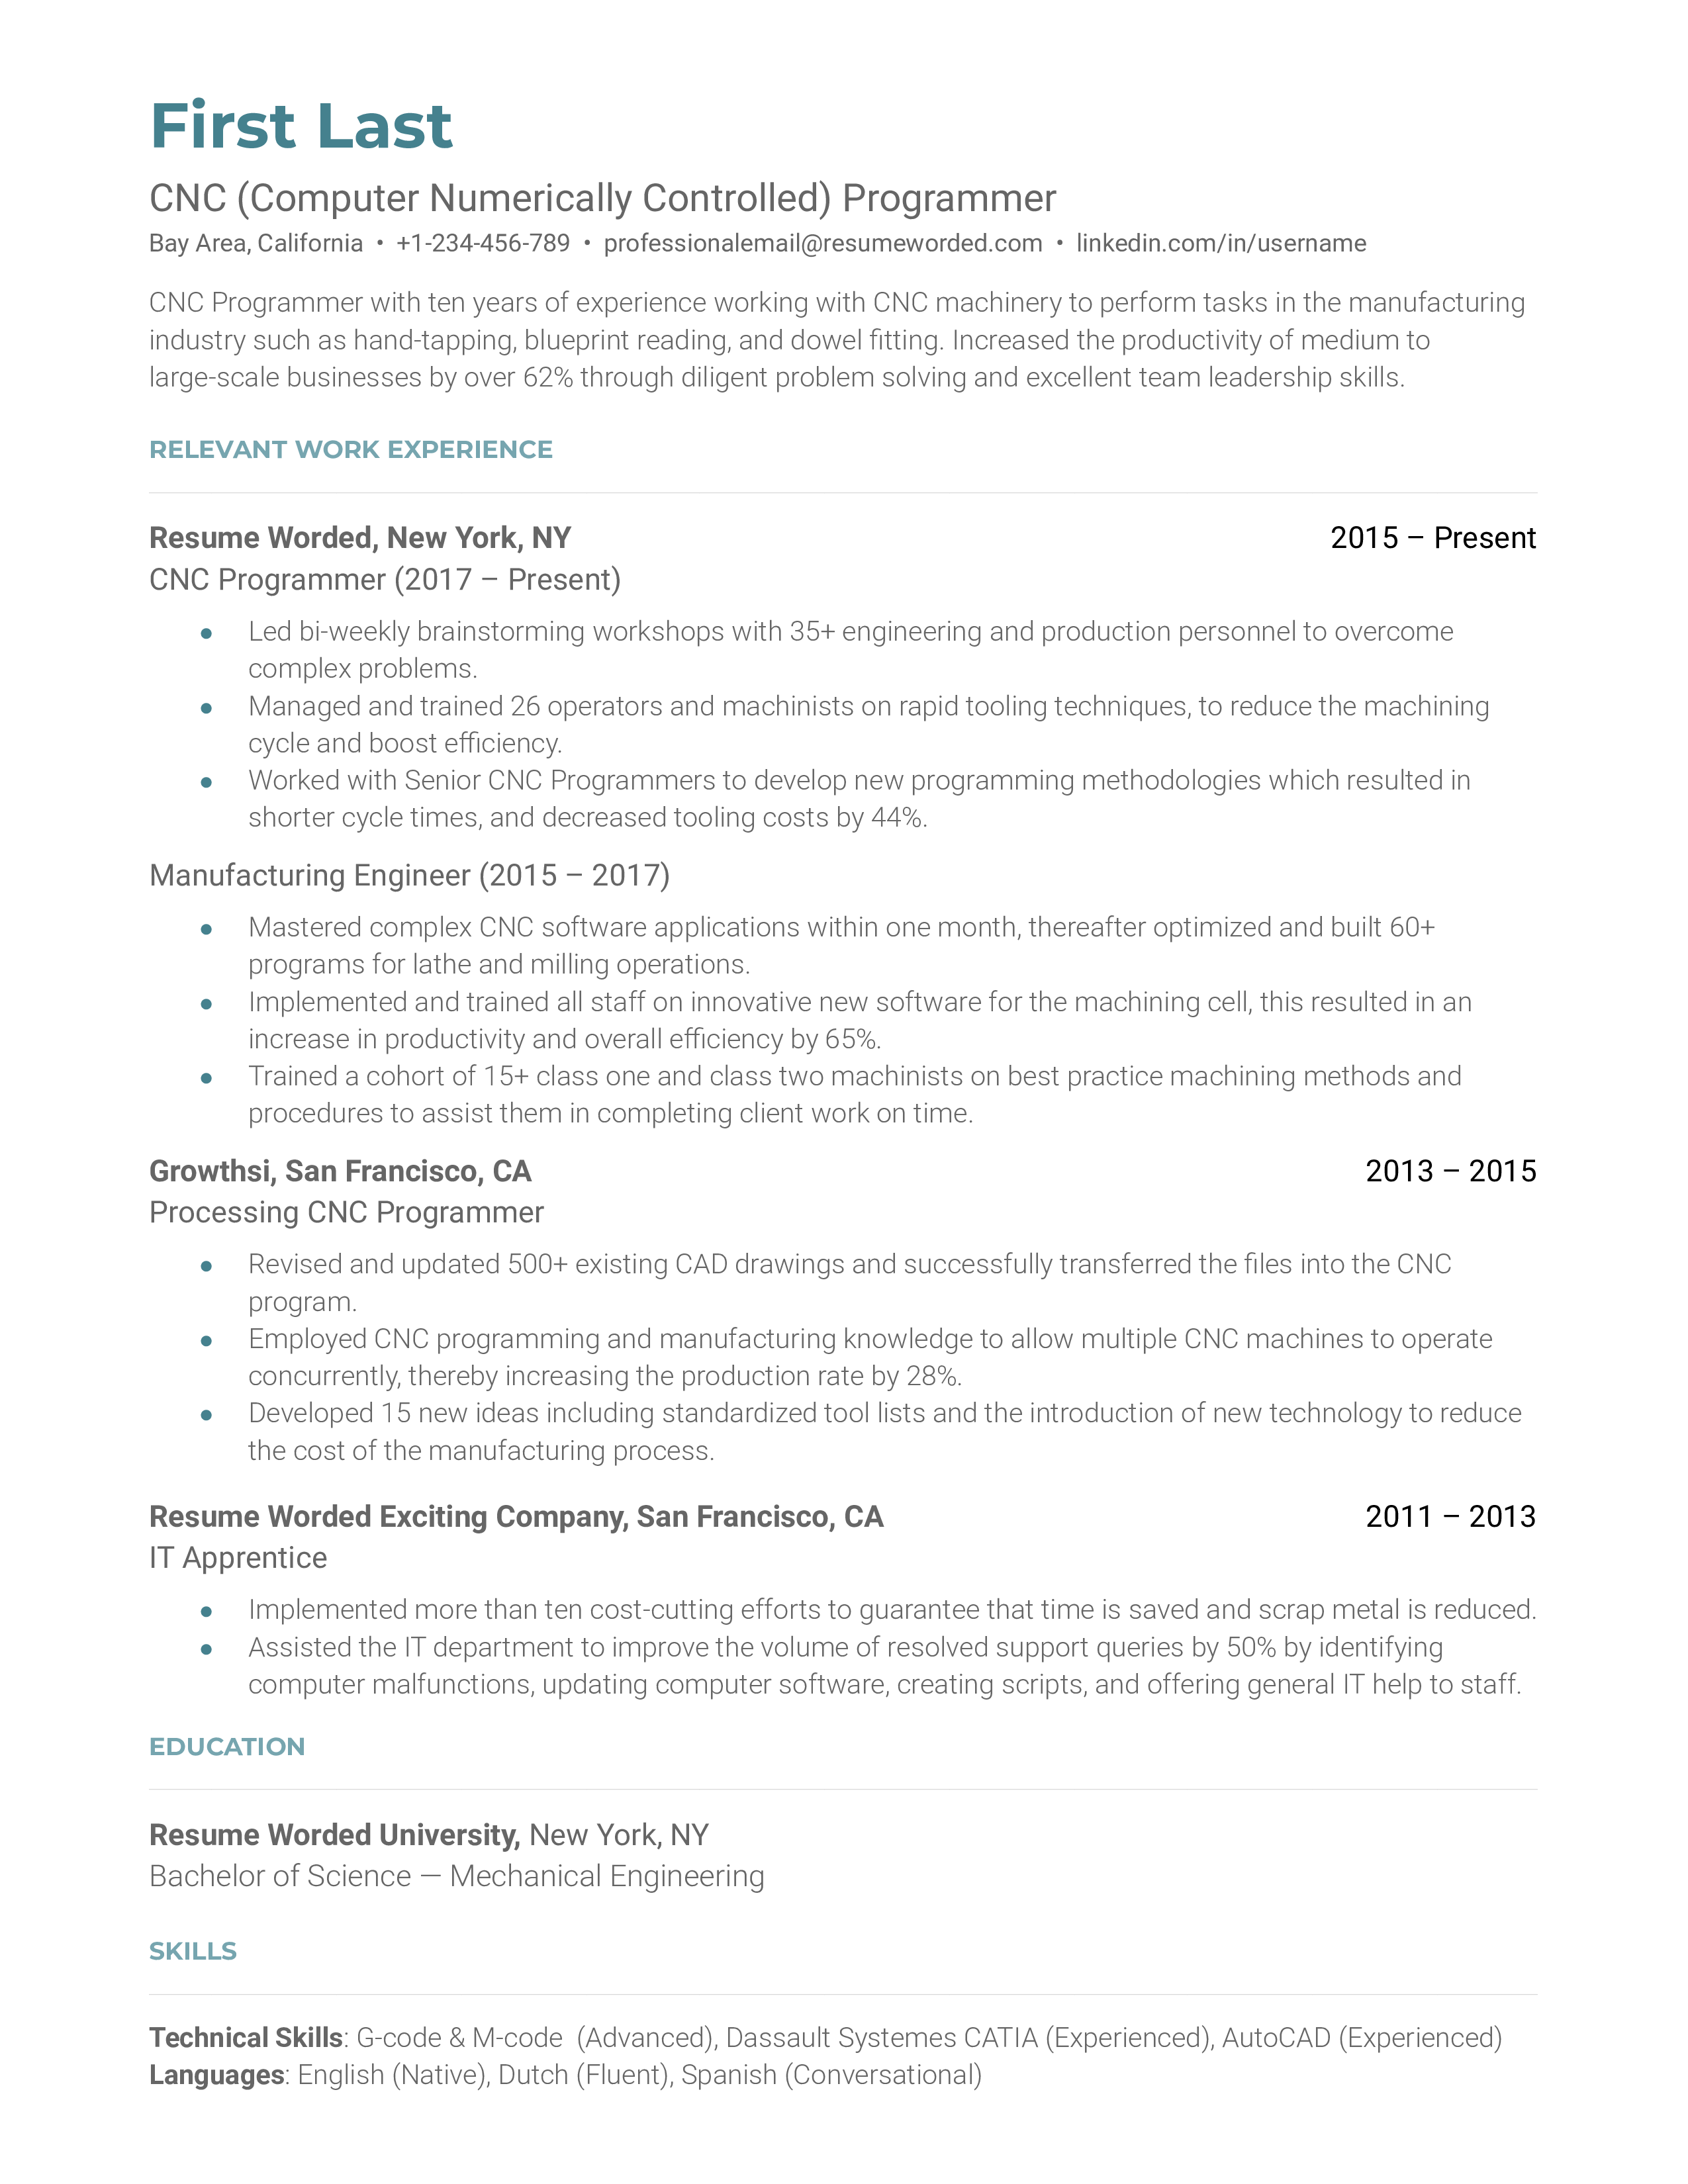 A CNC Programmer resume template that prioritizes work experience